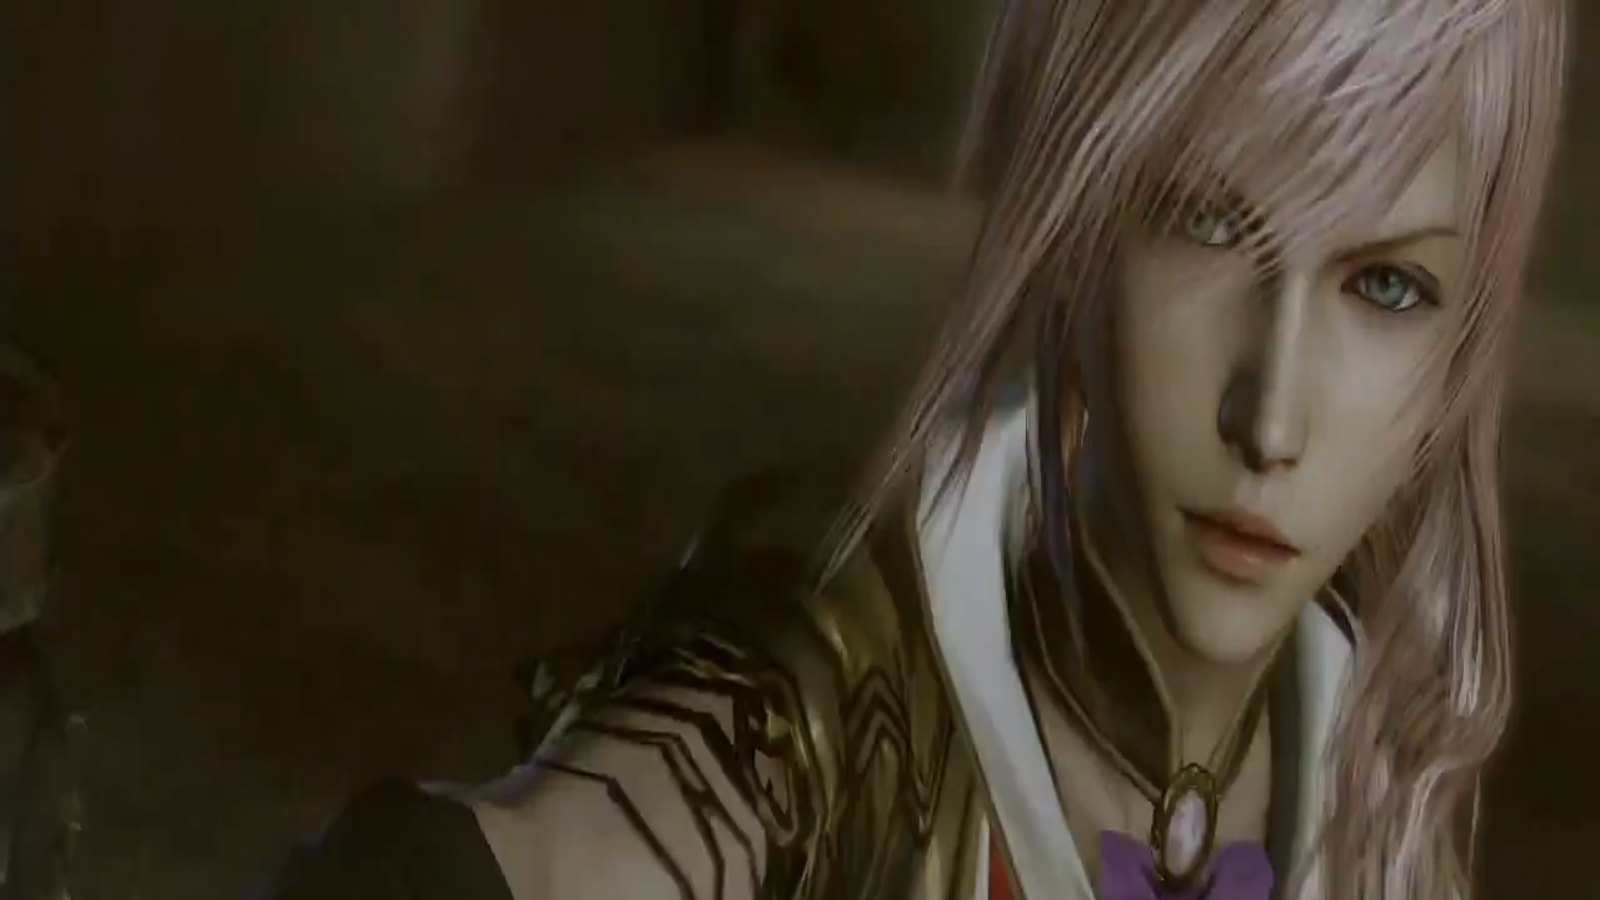 Pin on Final Fantasy XIII